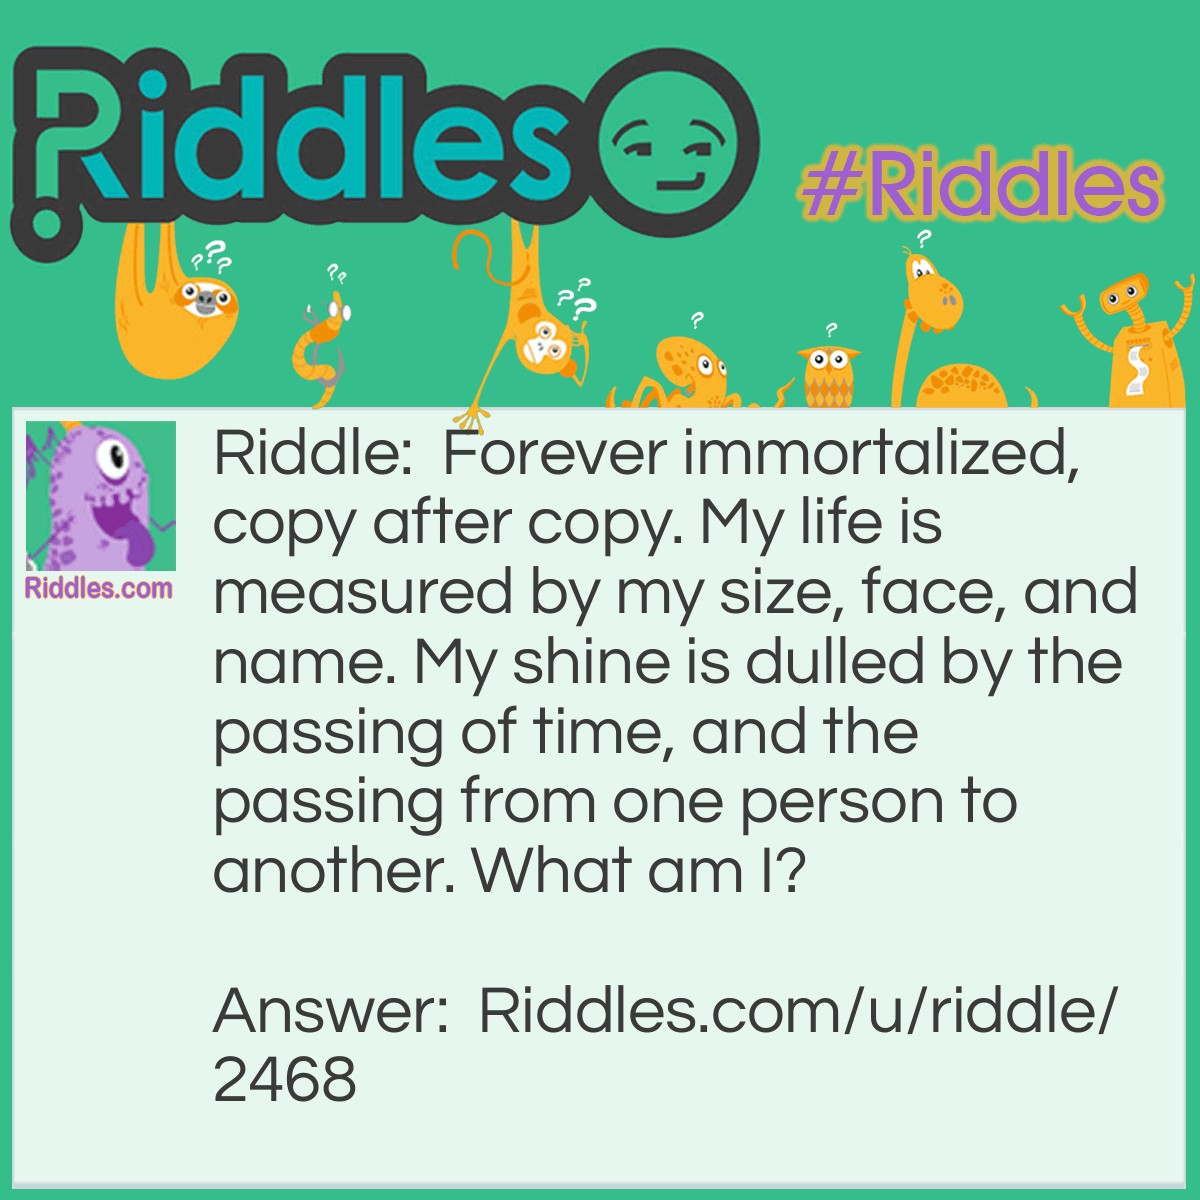 Riddle: Forever immortalized, copy after copy. My life is measured by my size, face, and name. My shine is dulled by the passing of time, and the passing from one person to another. What am I? Answer: A coin.